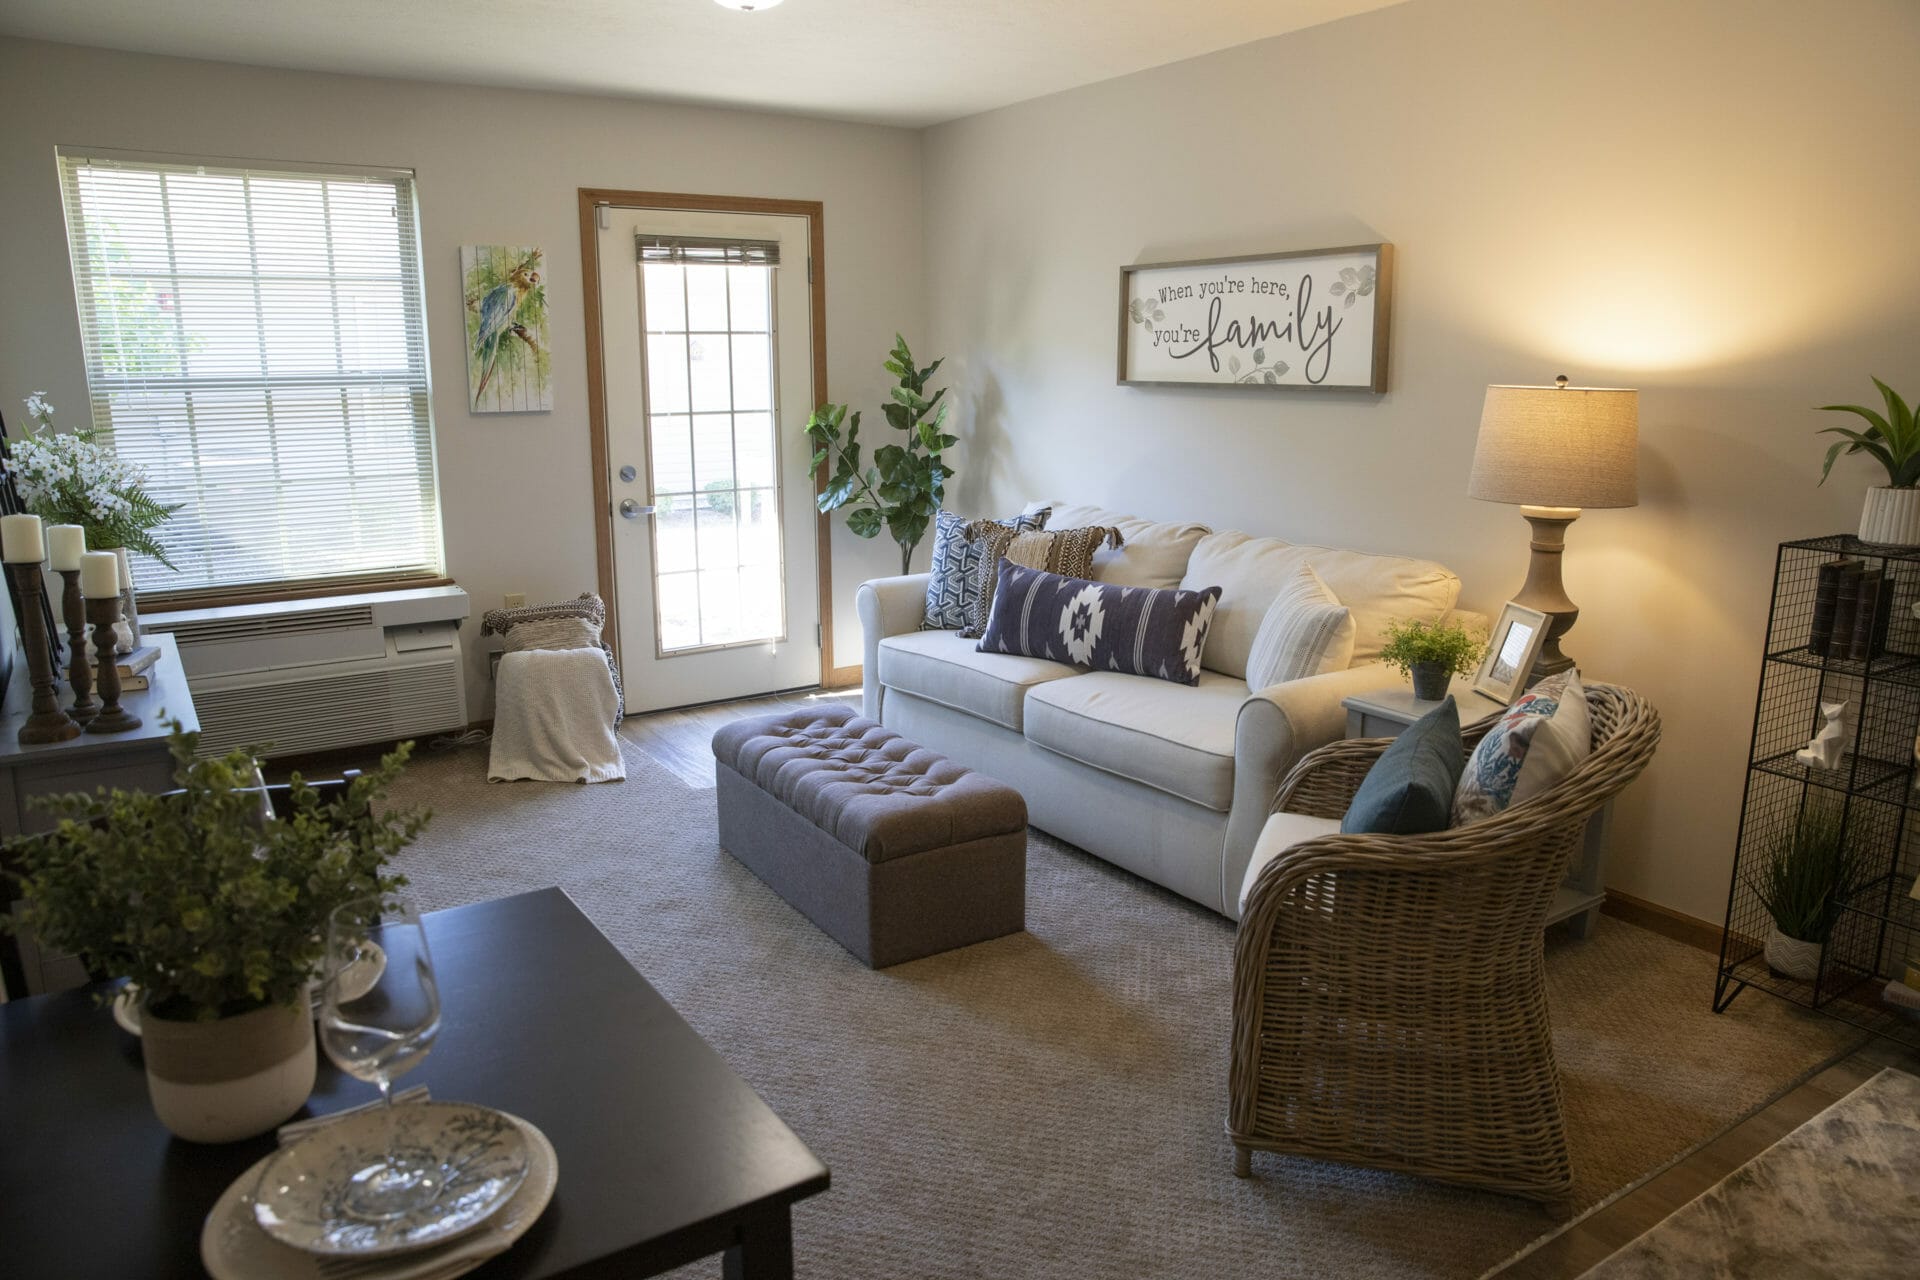 <span  class="uc_style_uc_tiles_grid_image_elementor_uc_items_attribute_title" style="color:#000000;">Living room in an apartment at Brownsburg Meadows Assisted Living. </span>